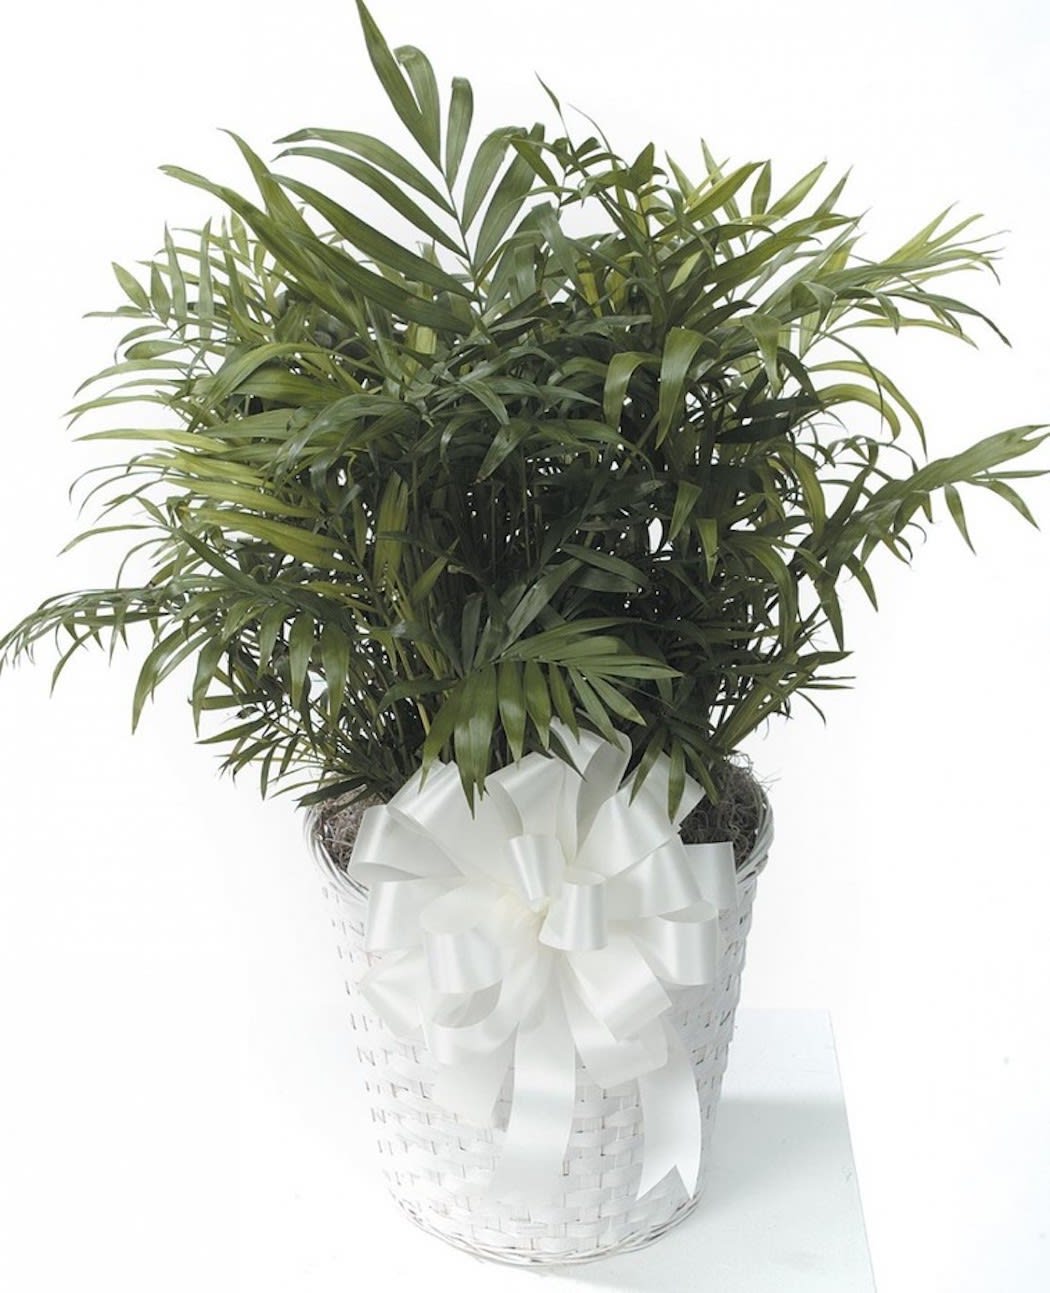 Medium Parlor Palm - An 8&quot; parlor palm in a wicker basket with bow. A wonderful plant for the family to enjoy for years to come. Basket may be white or brown.